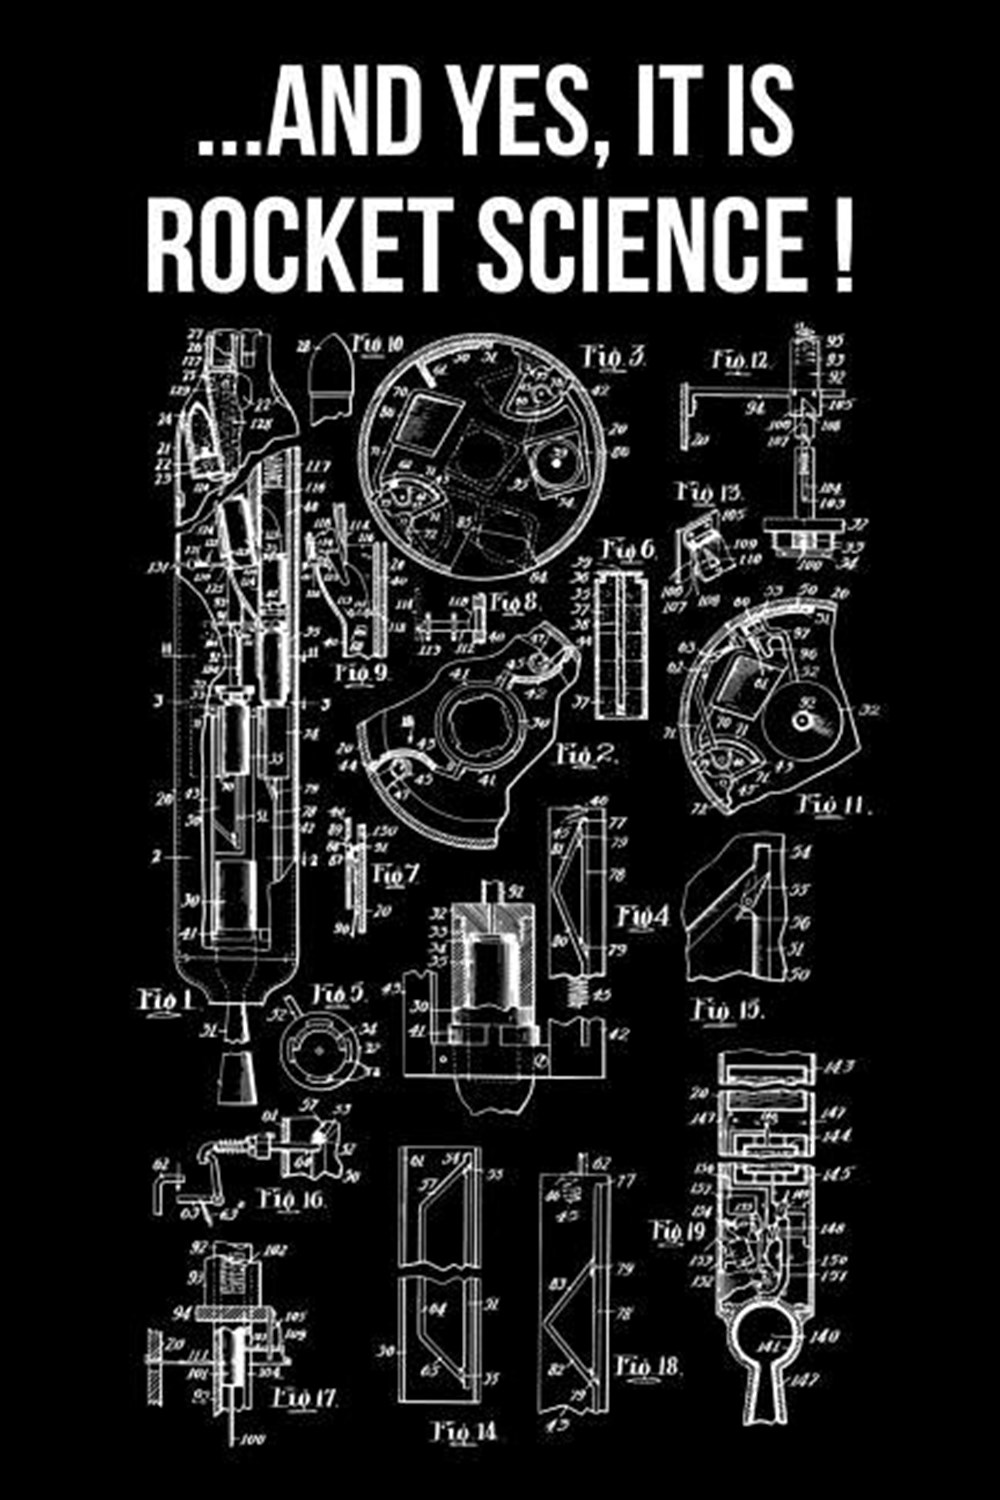 ... And Yes It Is Rocket Science! 2020 Weekly Calendar 12 Months 107 pages 6 x 9 in. Planner Diary O